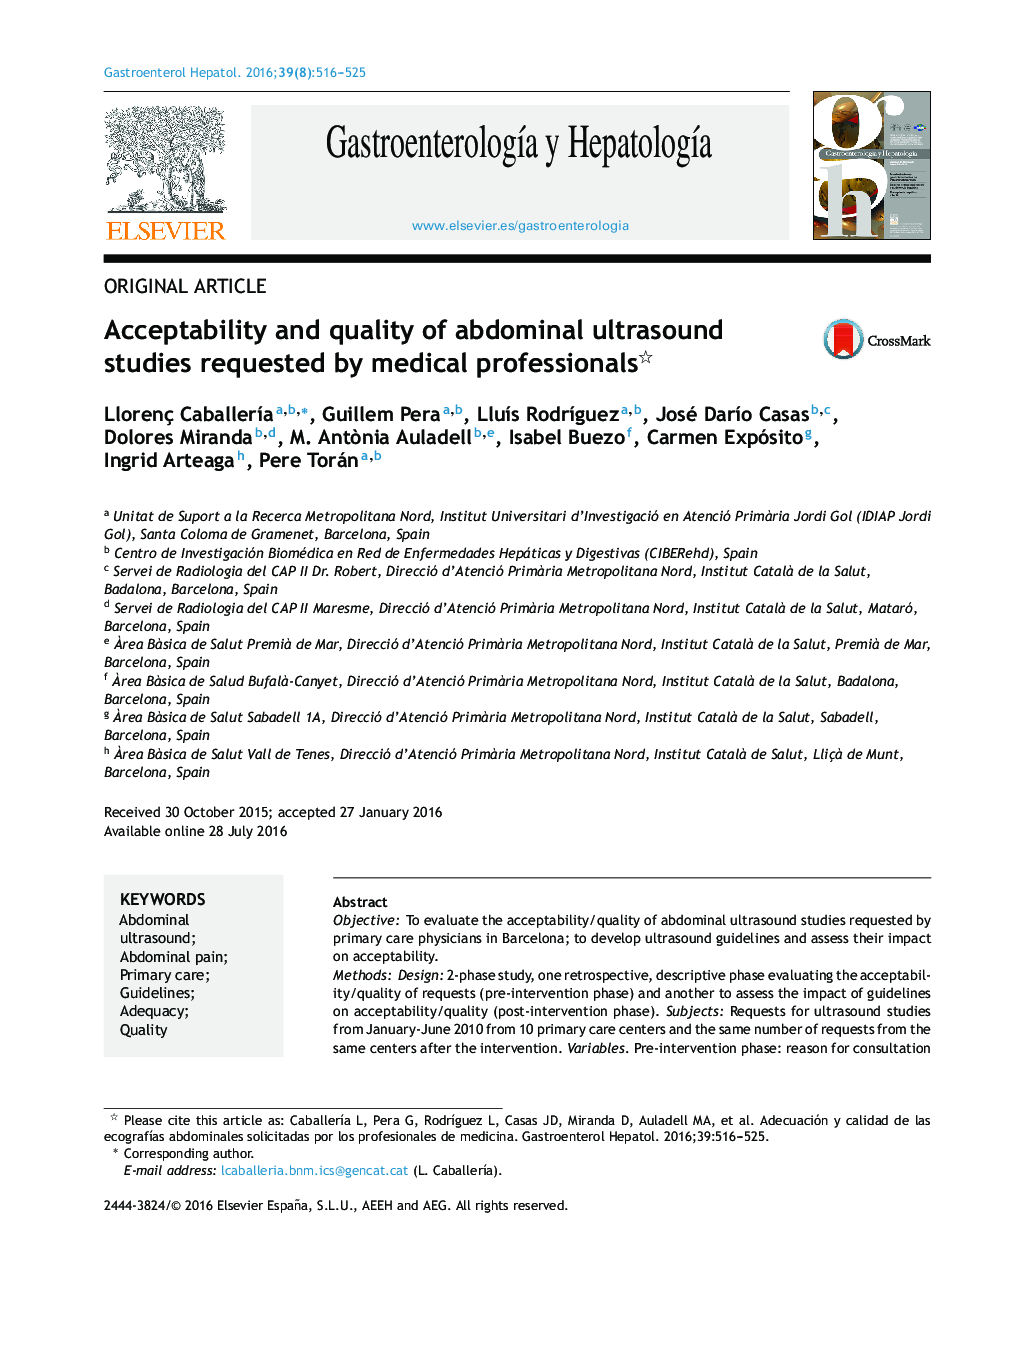 Acceptability and quality of abdominal ultrasound studies requested by medical professionals